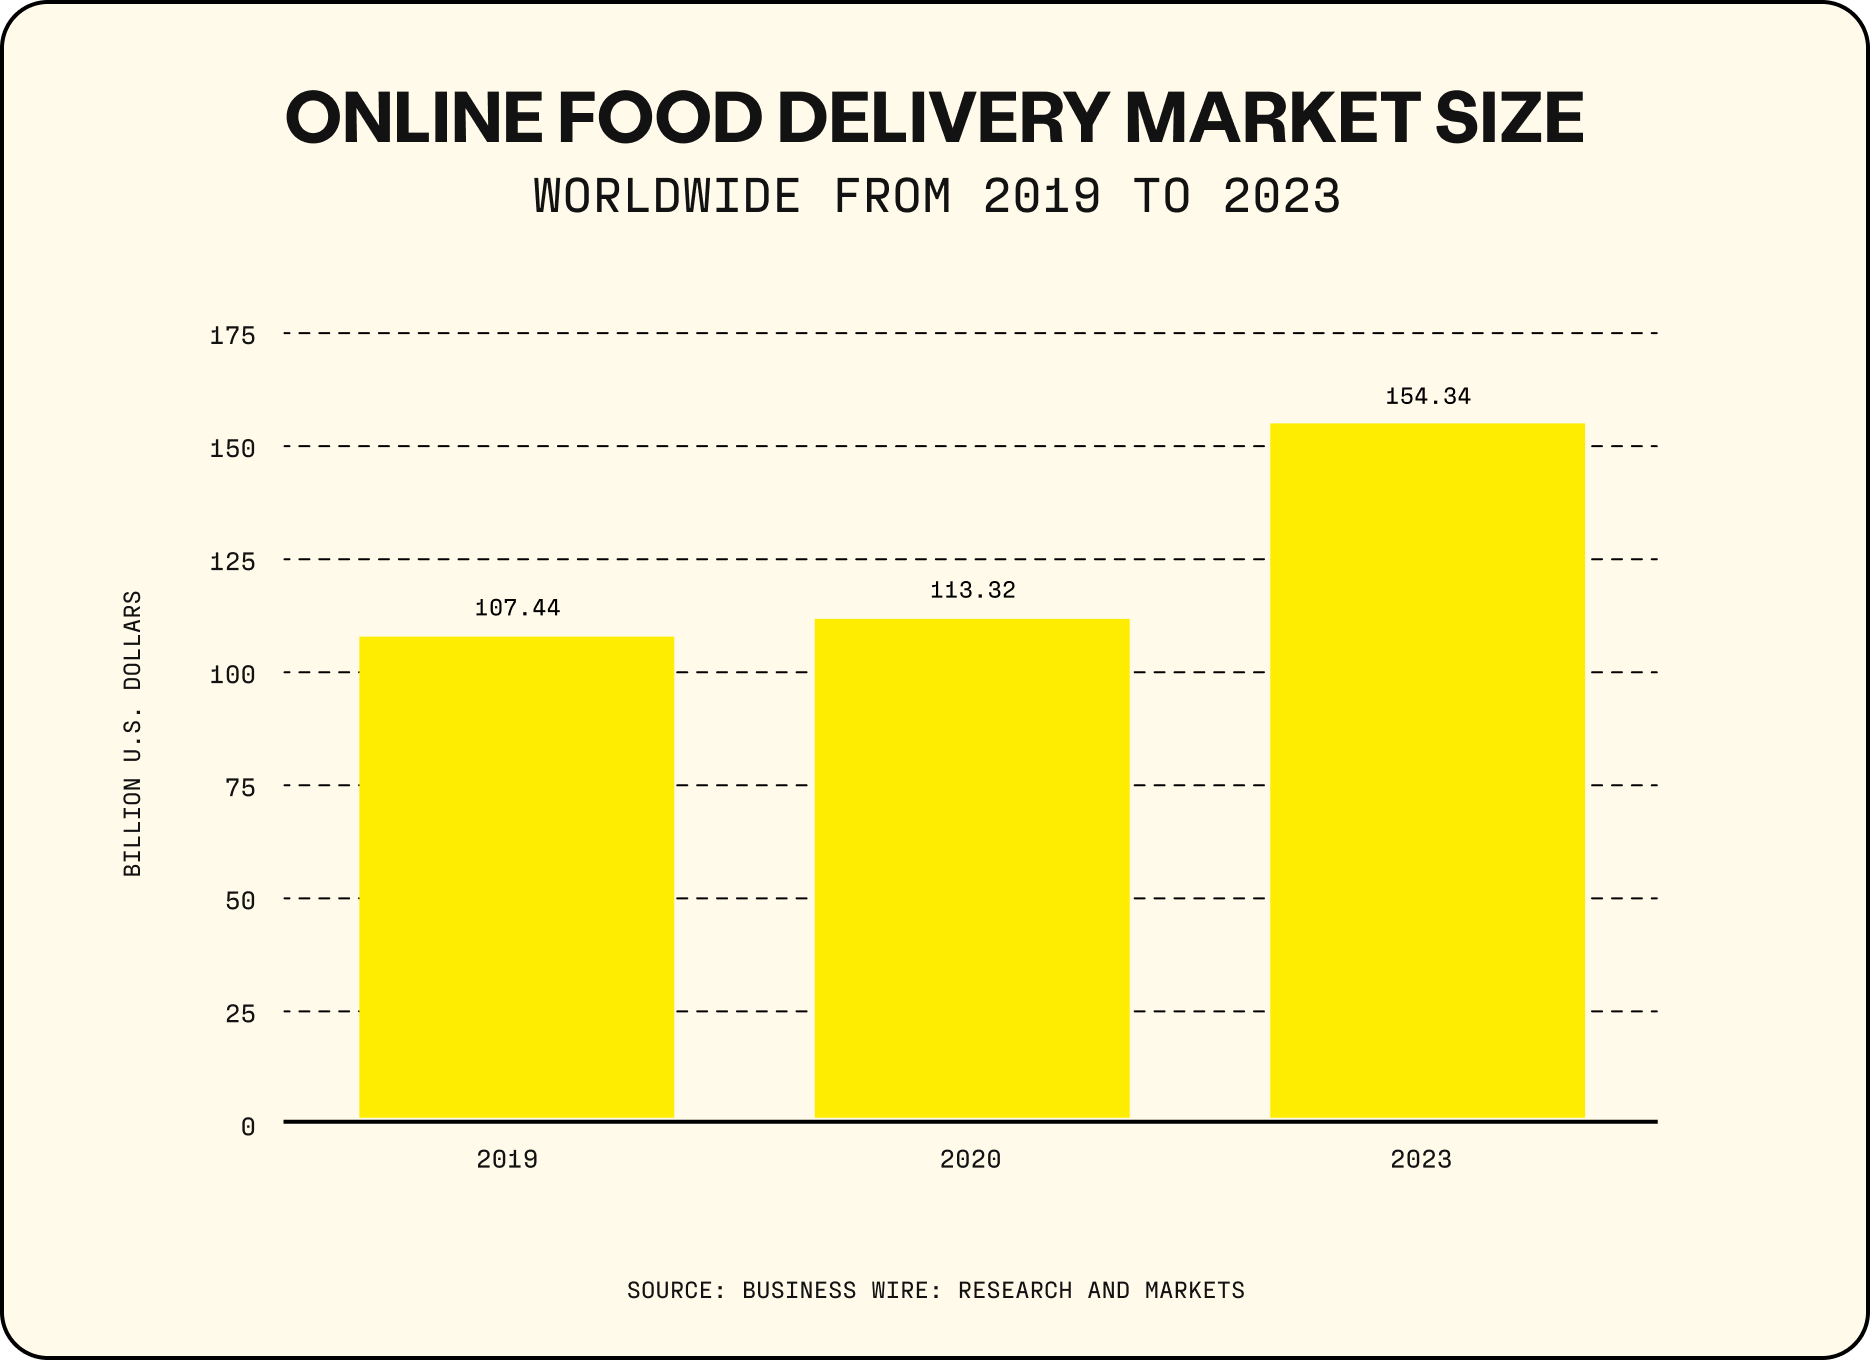 Online Food Delivery Market Size stat from 2019-2023.